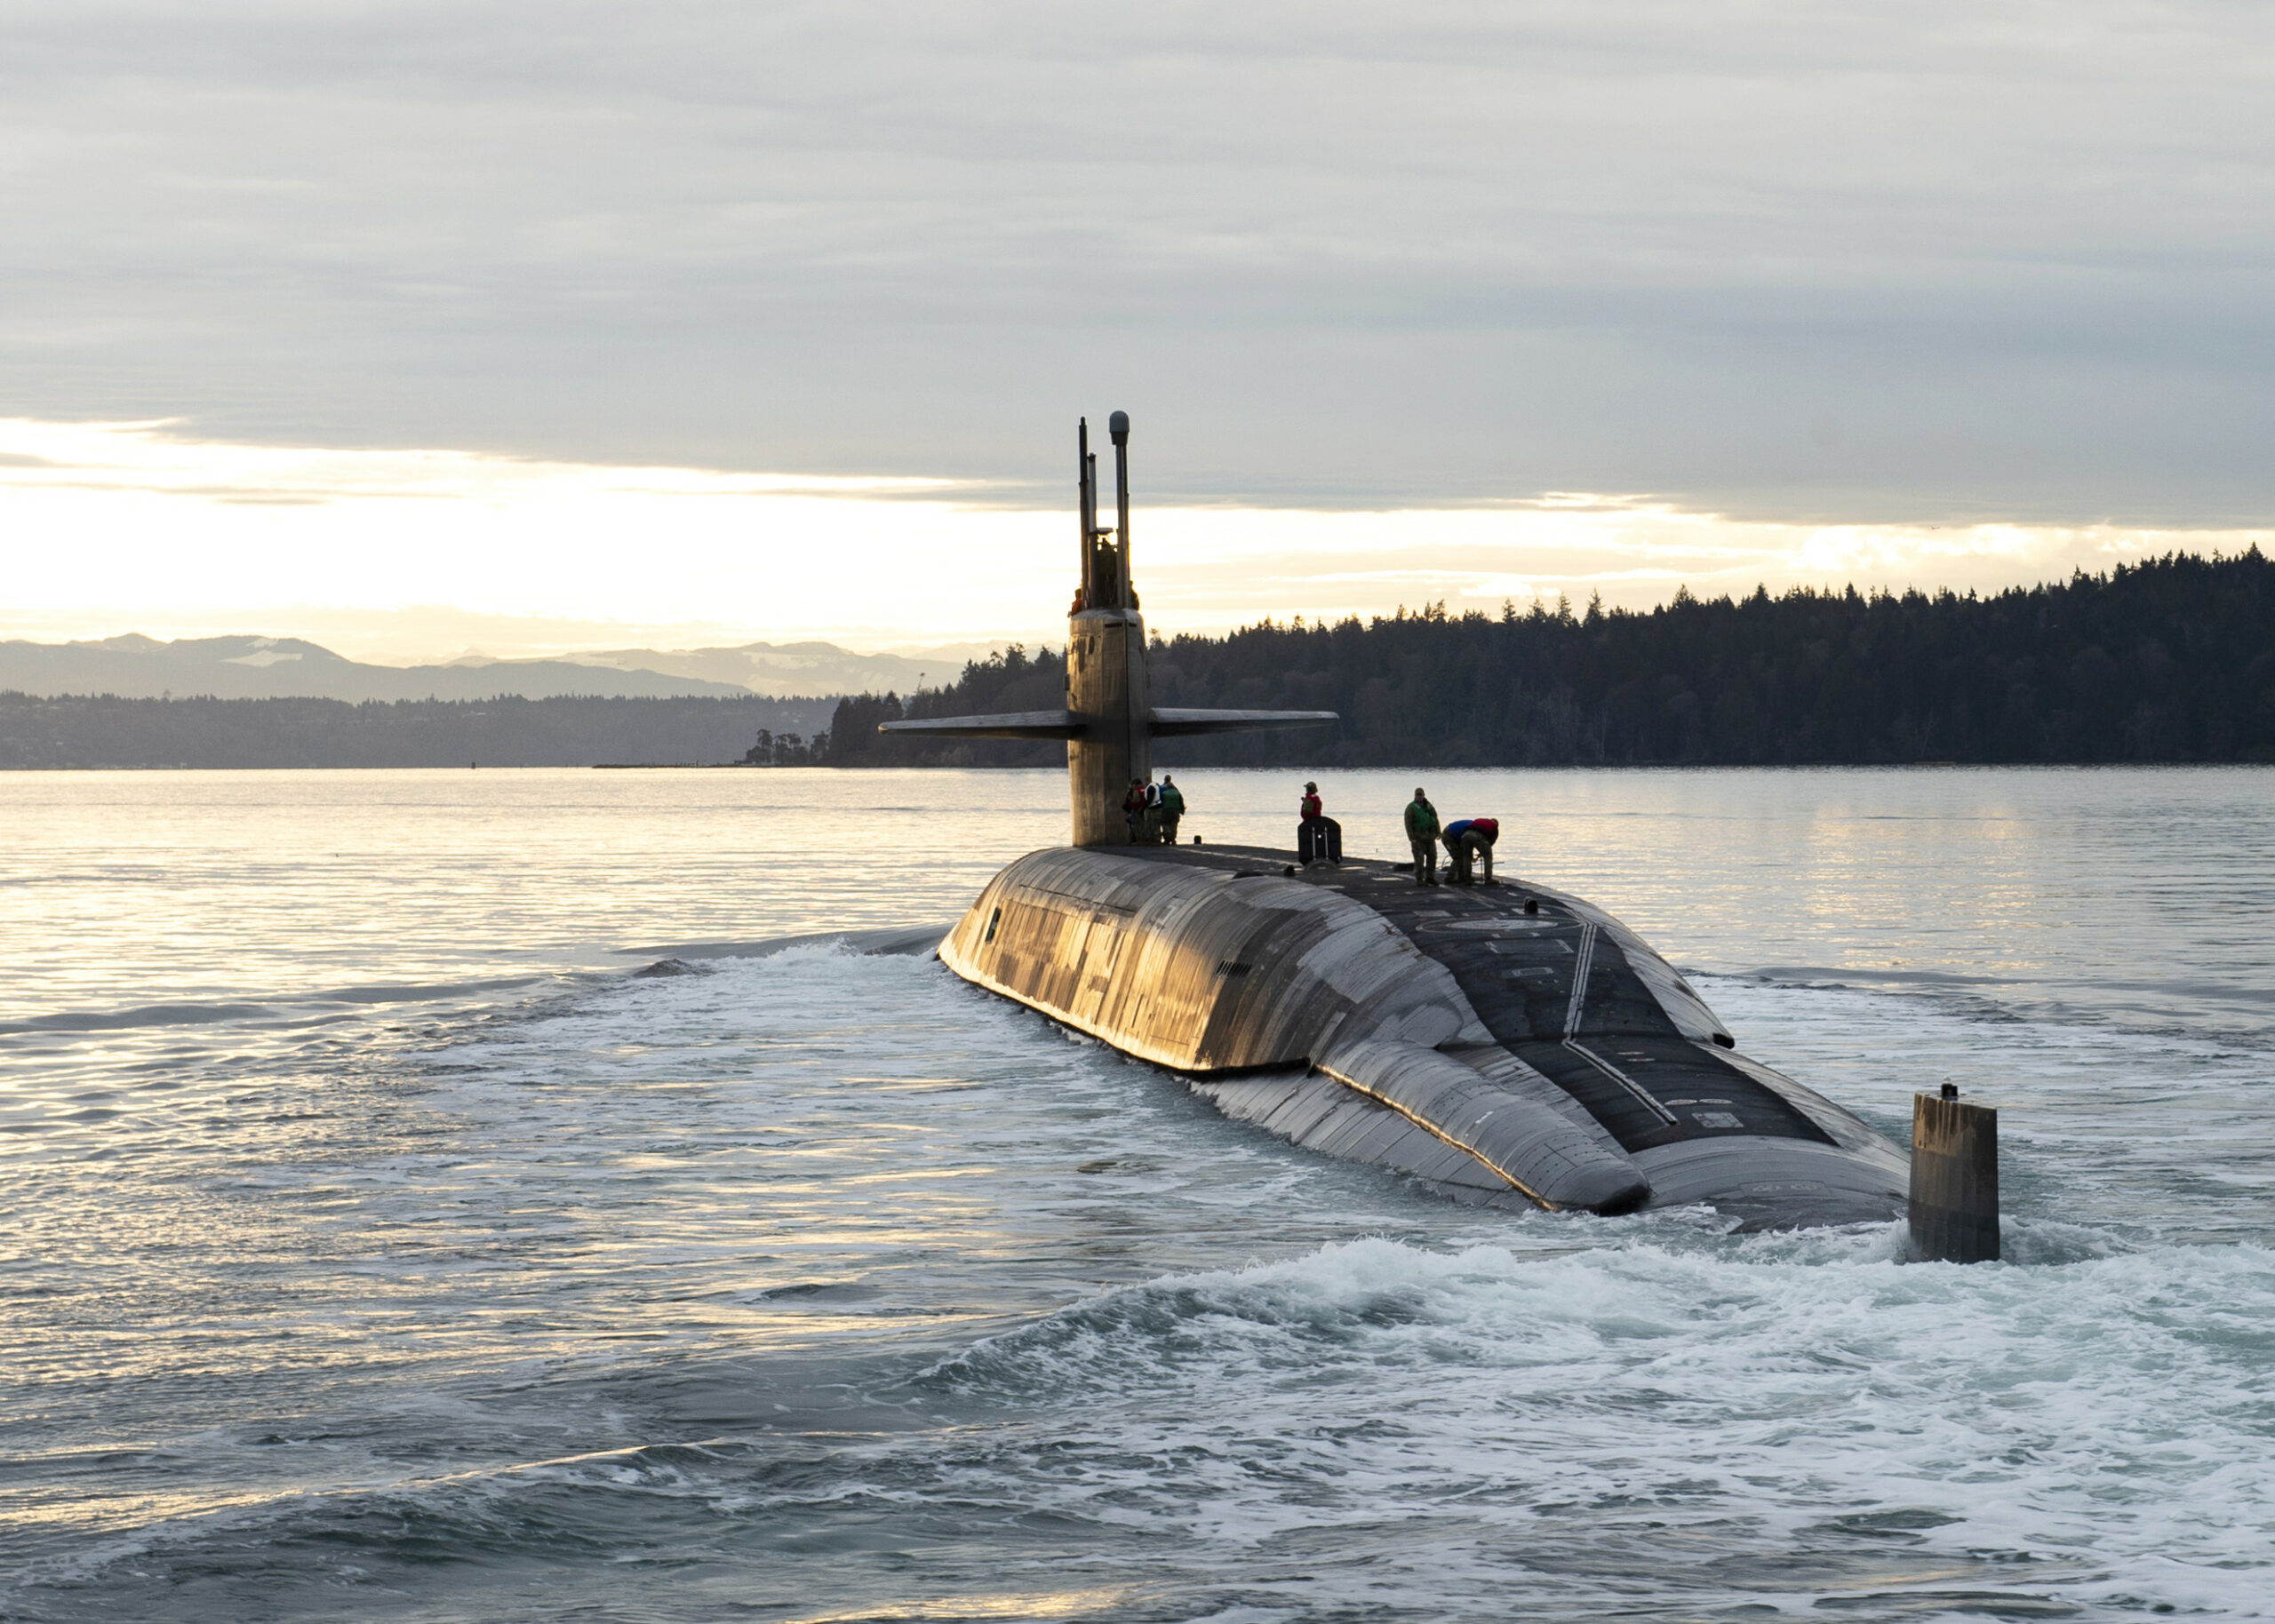 The Ohio-class ballistic missile submarine USS Louisiana (SSBN 743) transits Puget Sound following a 41-month engineered refueling overhaul at Puget Sound Naval Shipyard and Intermediate Maintenance Facility, Feb. 9, 2023. Louisiana is one of eight ballistic-missile submarines stationed at Naval Base Kitsap-Bangor, providing the most survivable leg of the strategic deterrence triad for the United States. (U.S. Navy photo by Mass Communication Specialist 1st Class Brian G. Reynolds)